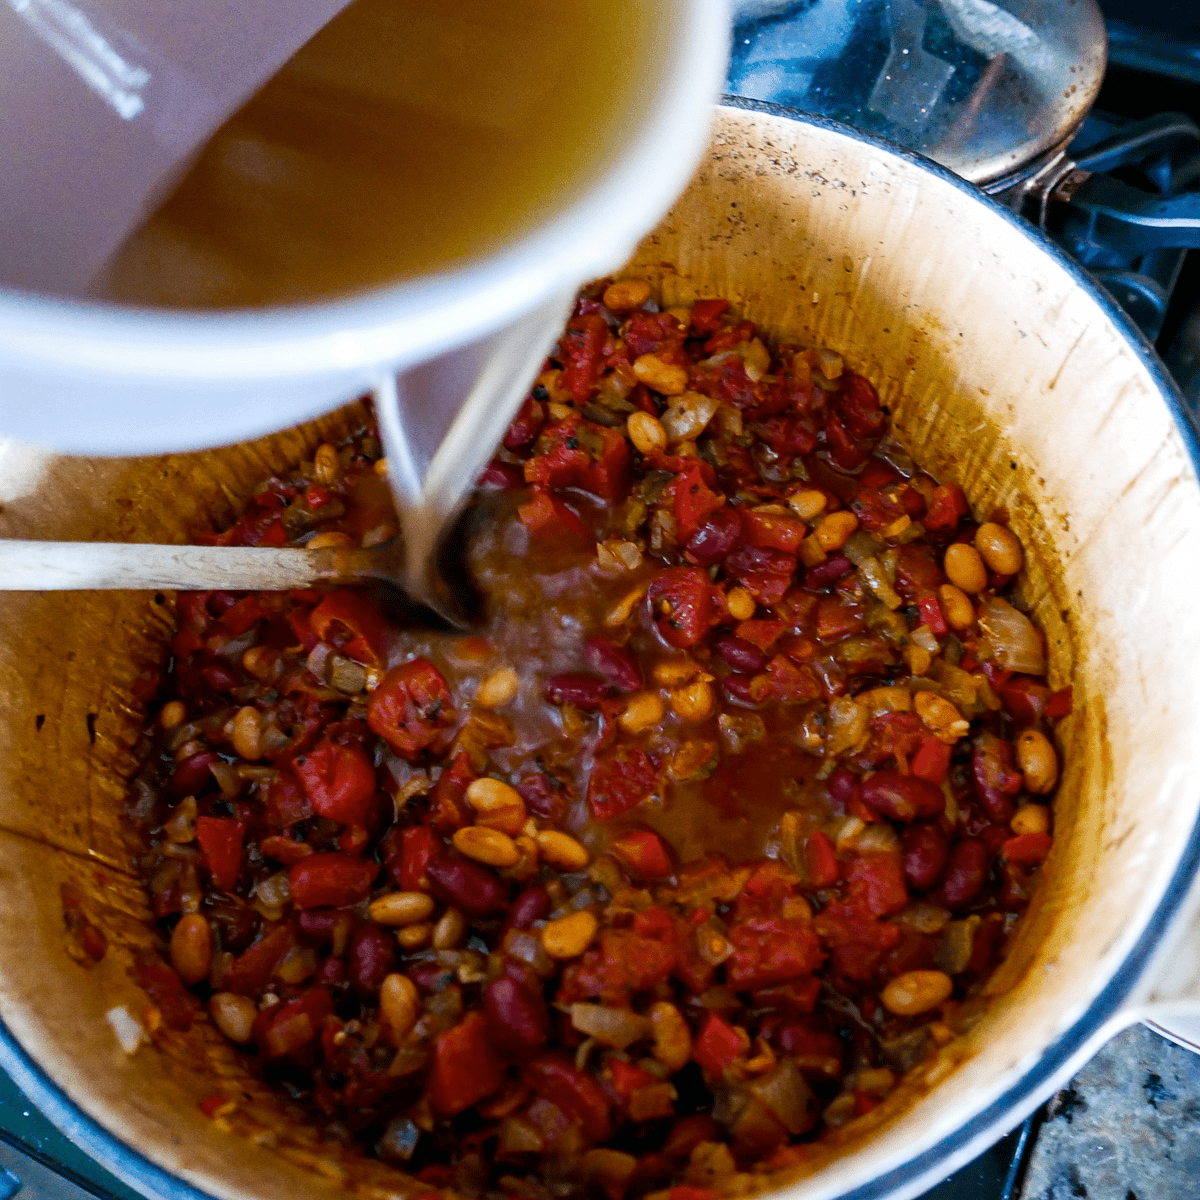 pouring vegetable broth into large pot with vegetables and beans.